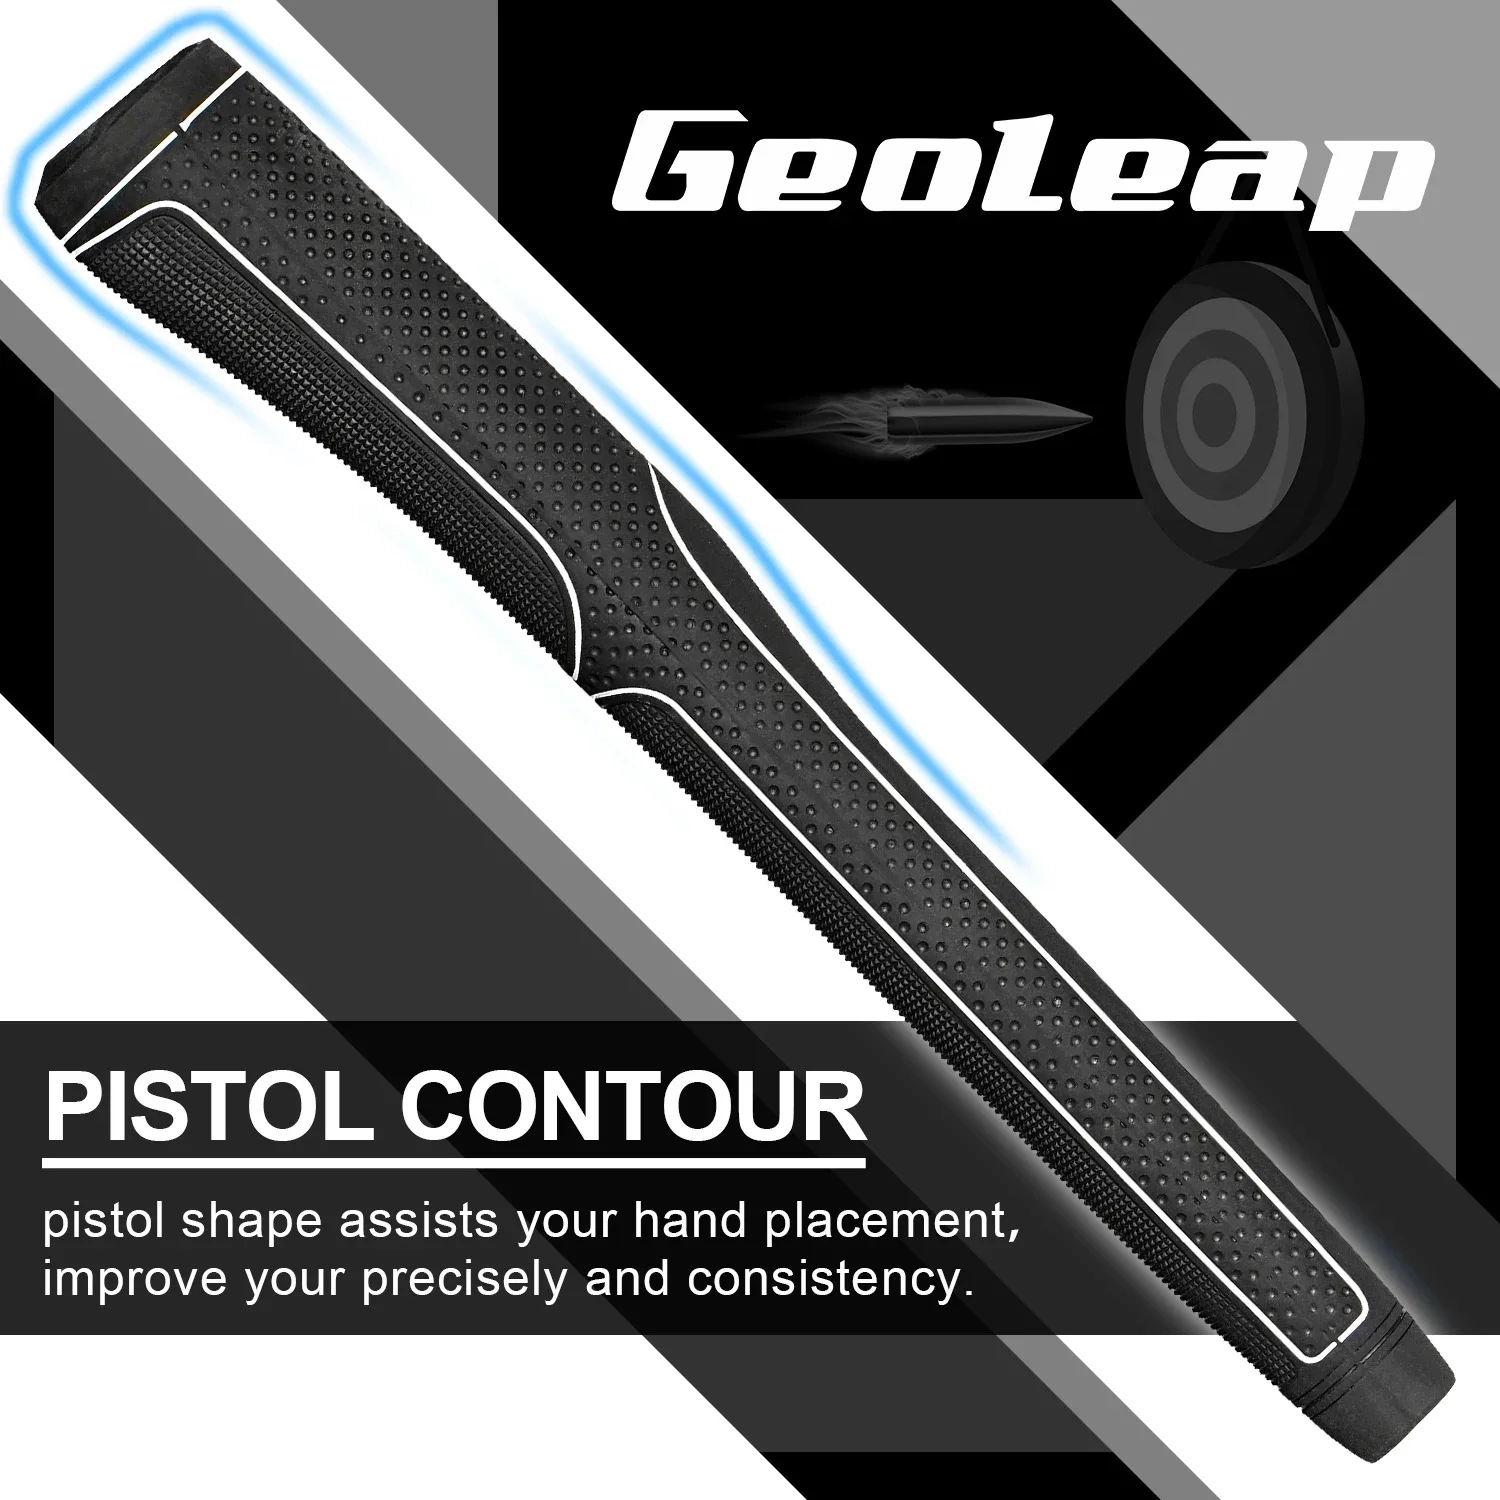 New Design Geoleap Rubber Golf Putter Grip，Psitol Contour, Soft Feeling,Minimize Grip Pressure,4 Colors  optional, Free Shipping